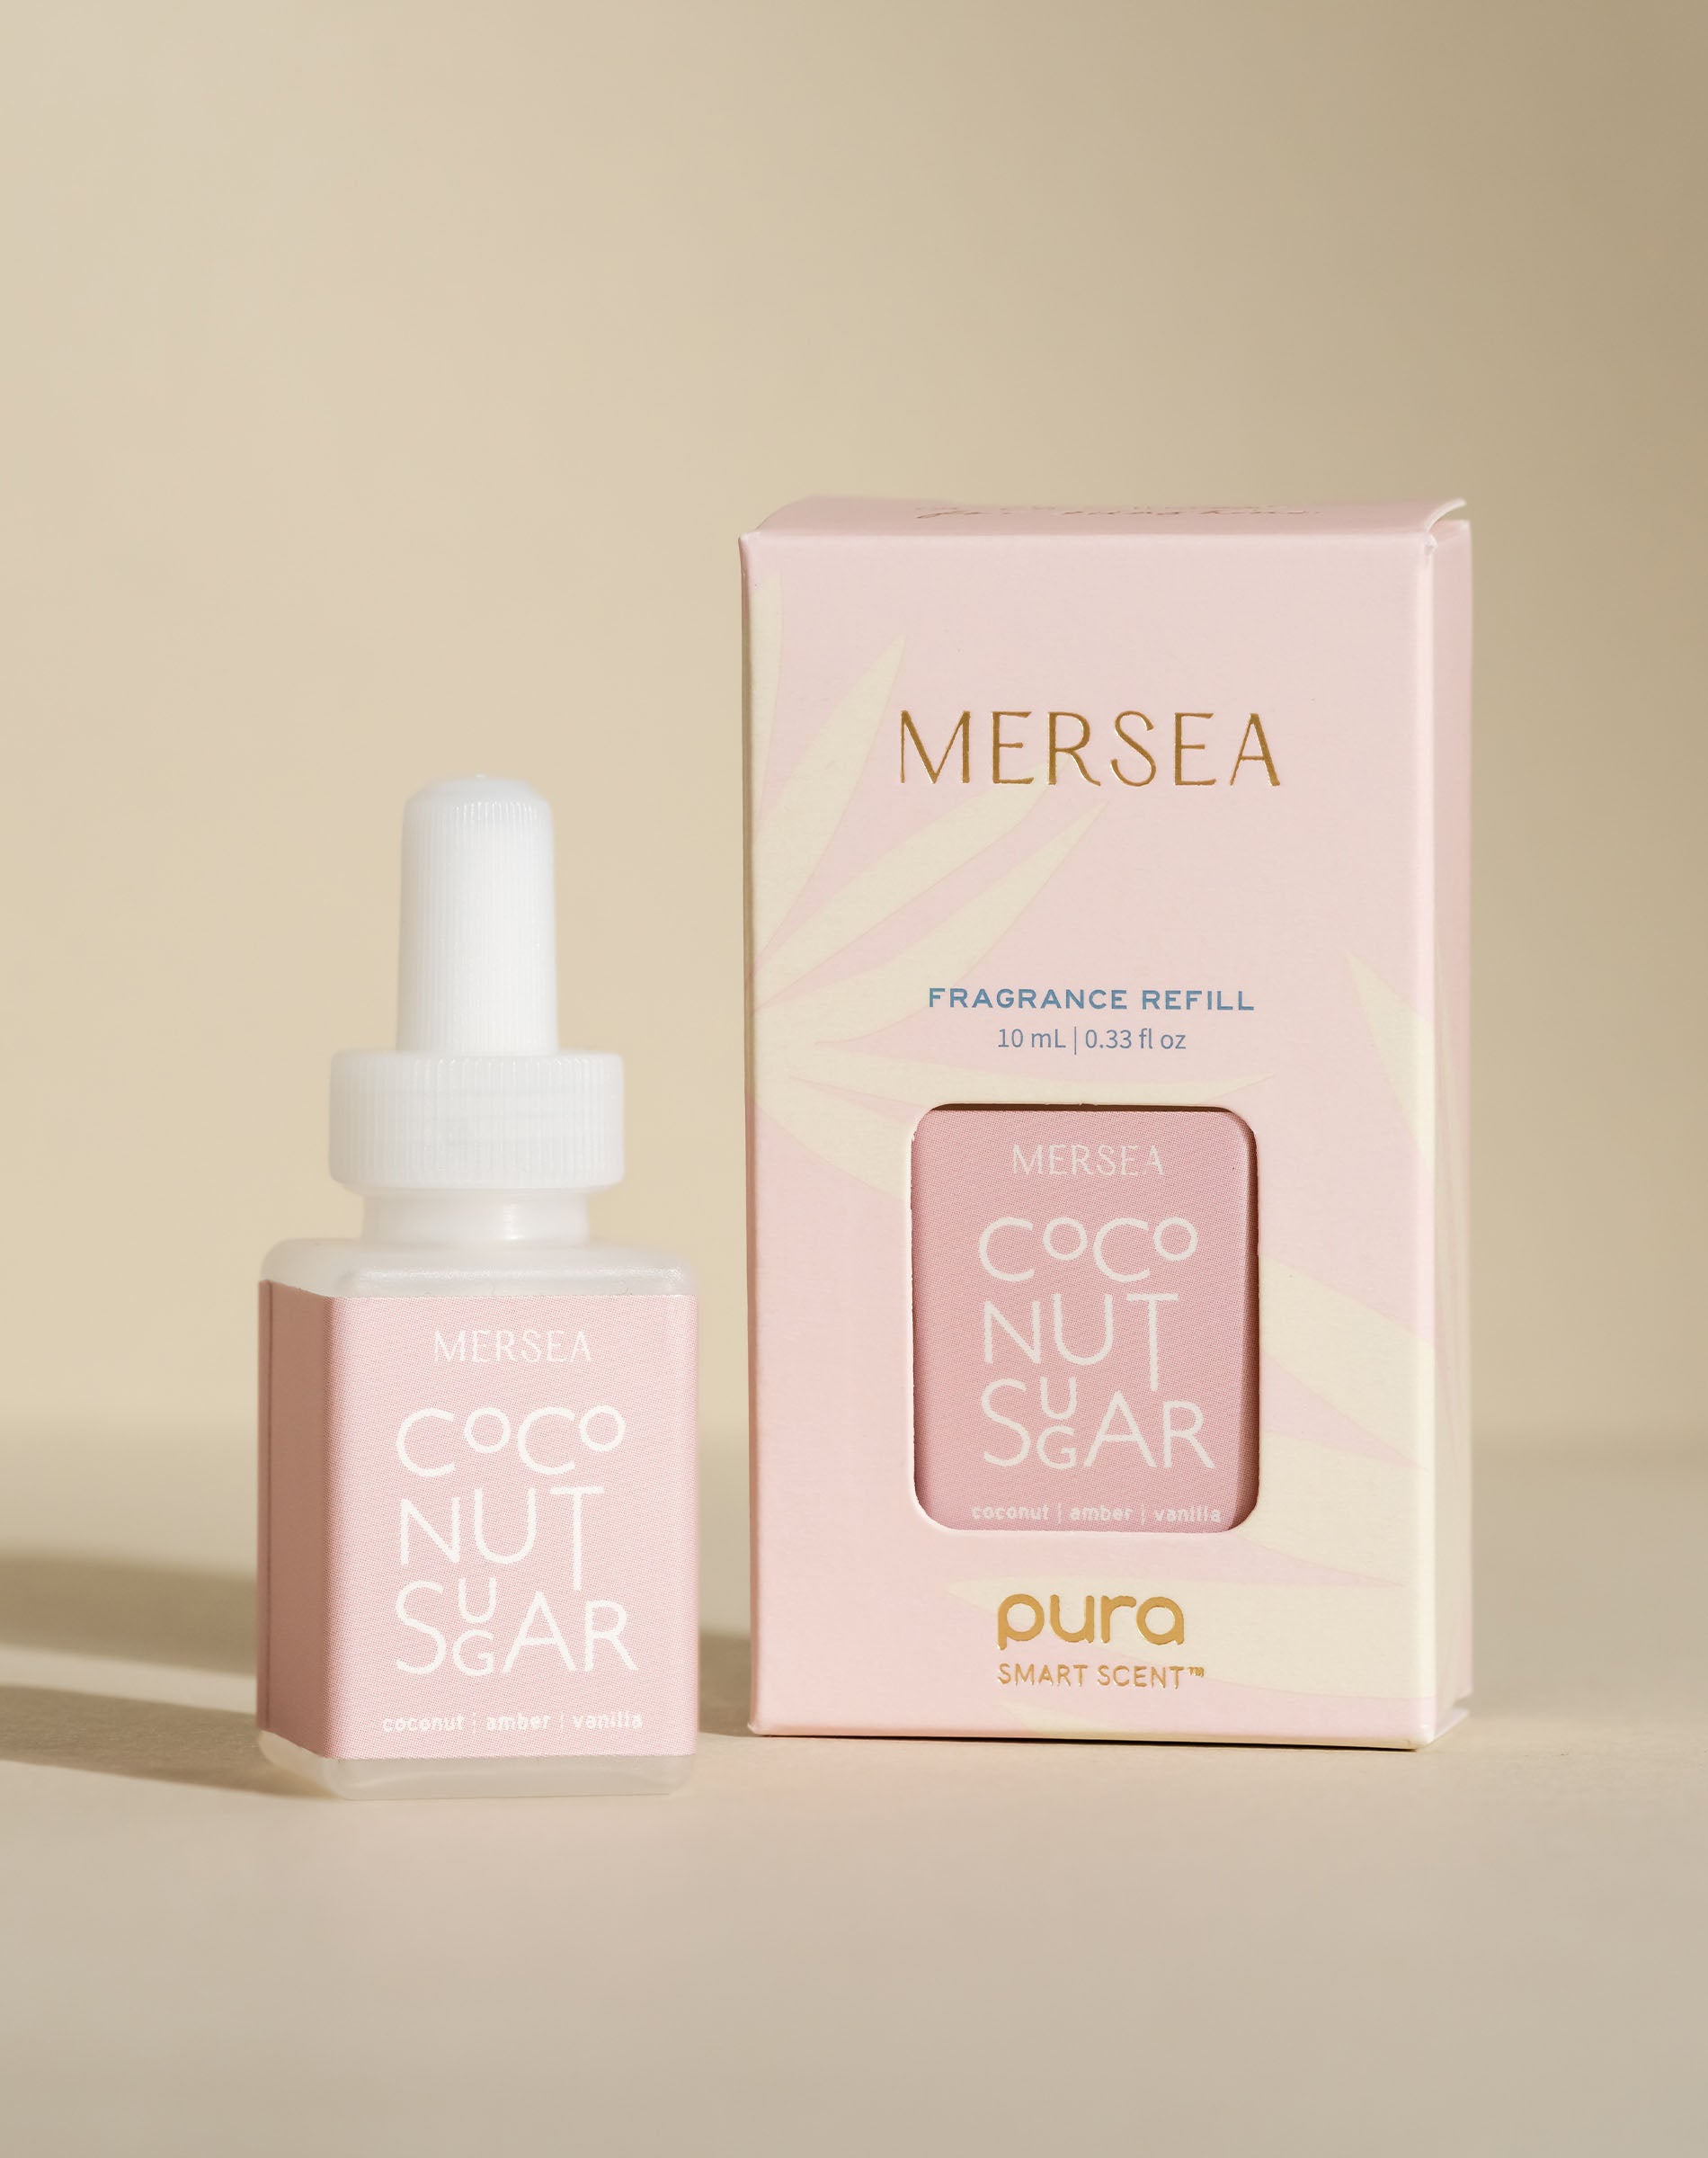 pura smart vial of mersea coconut sugar scent sitting next to boxed version of product